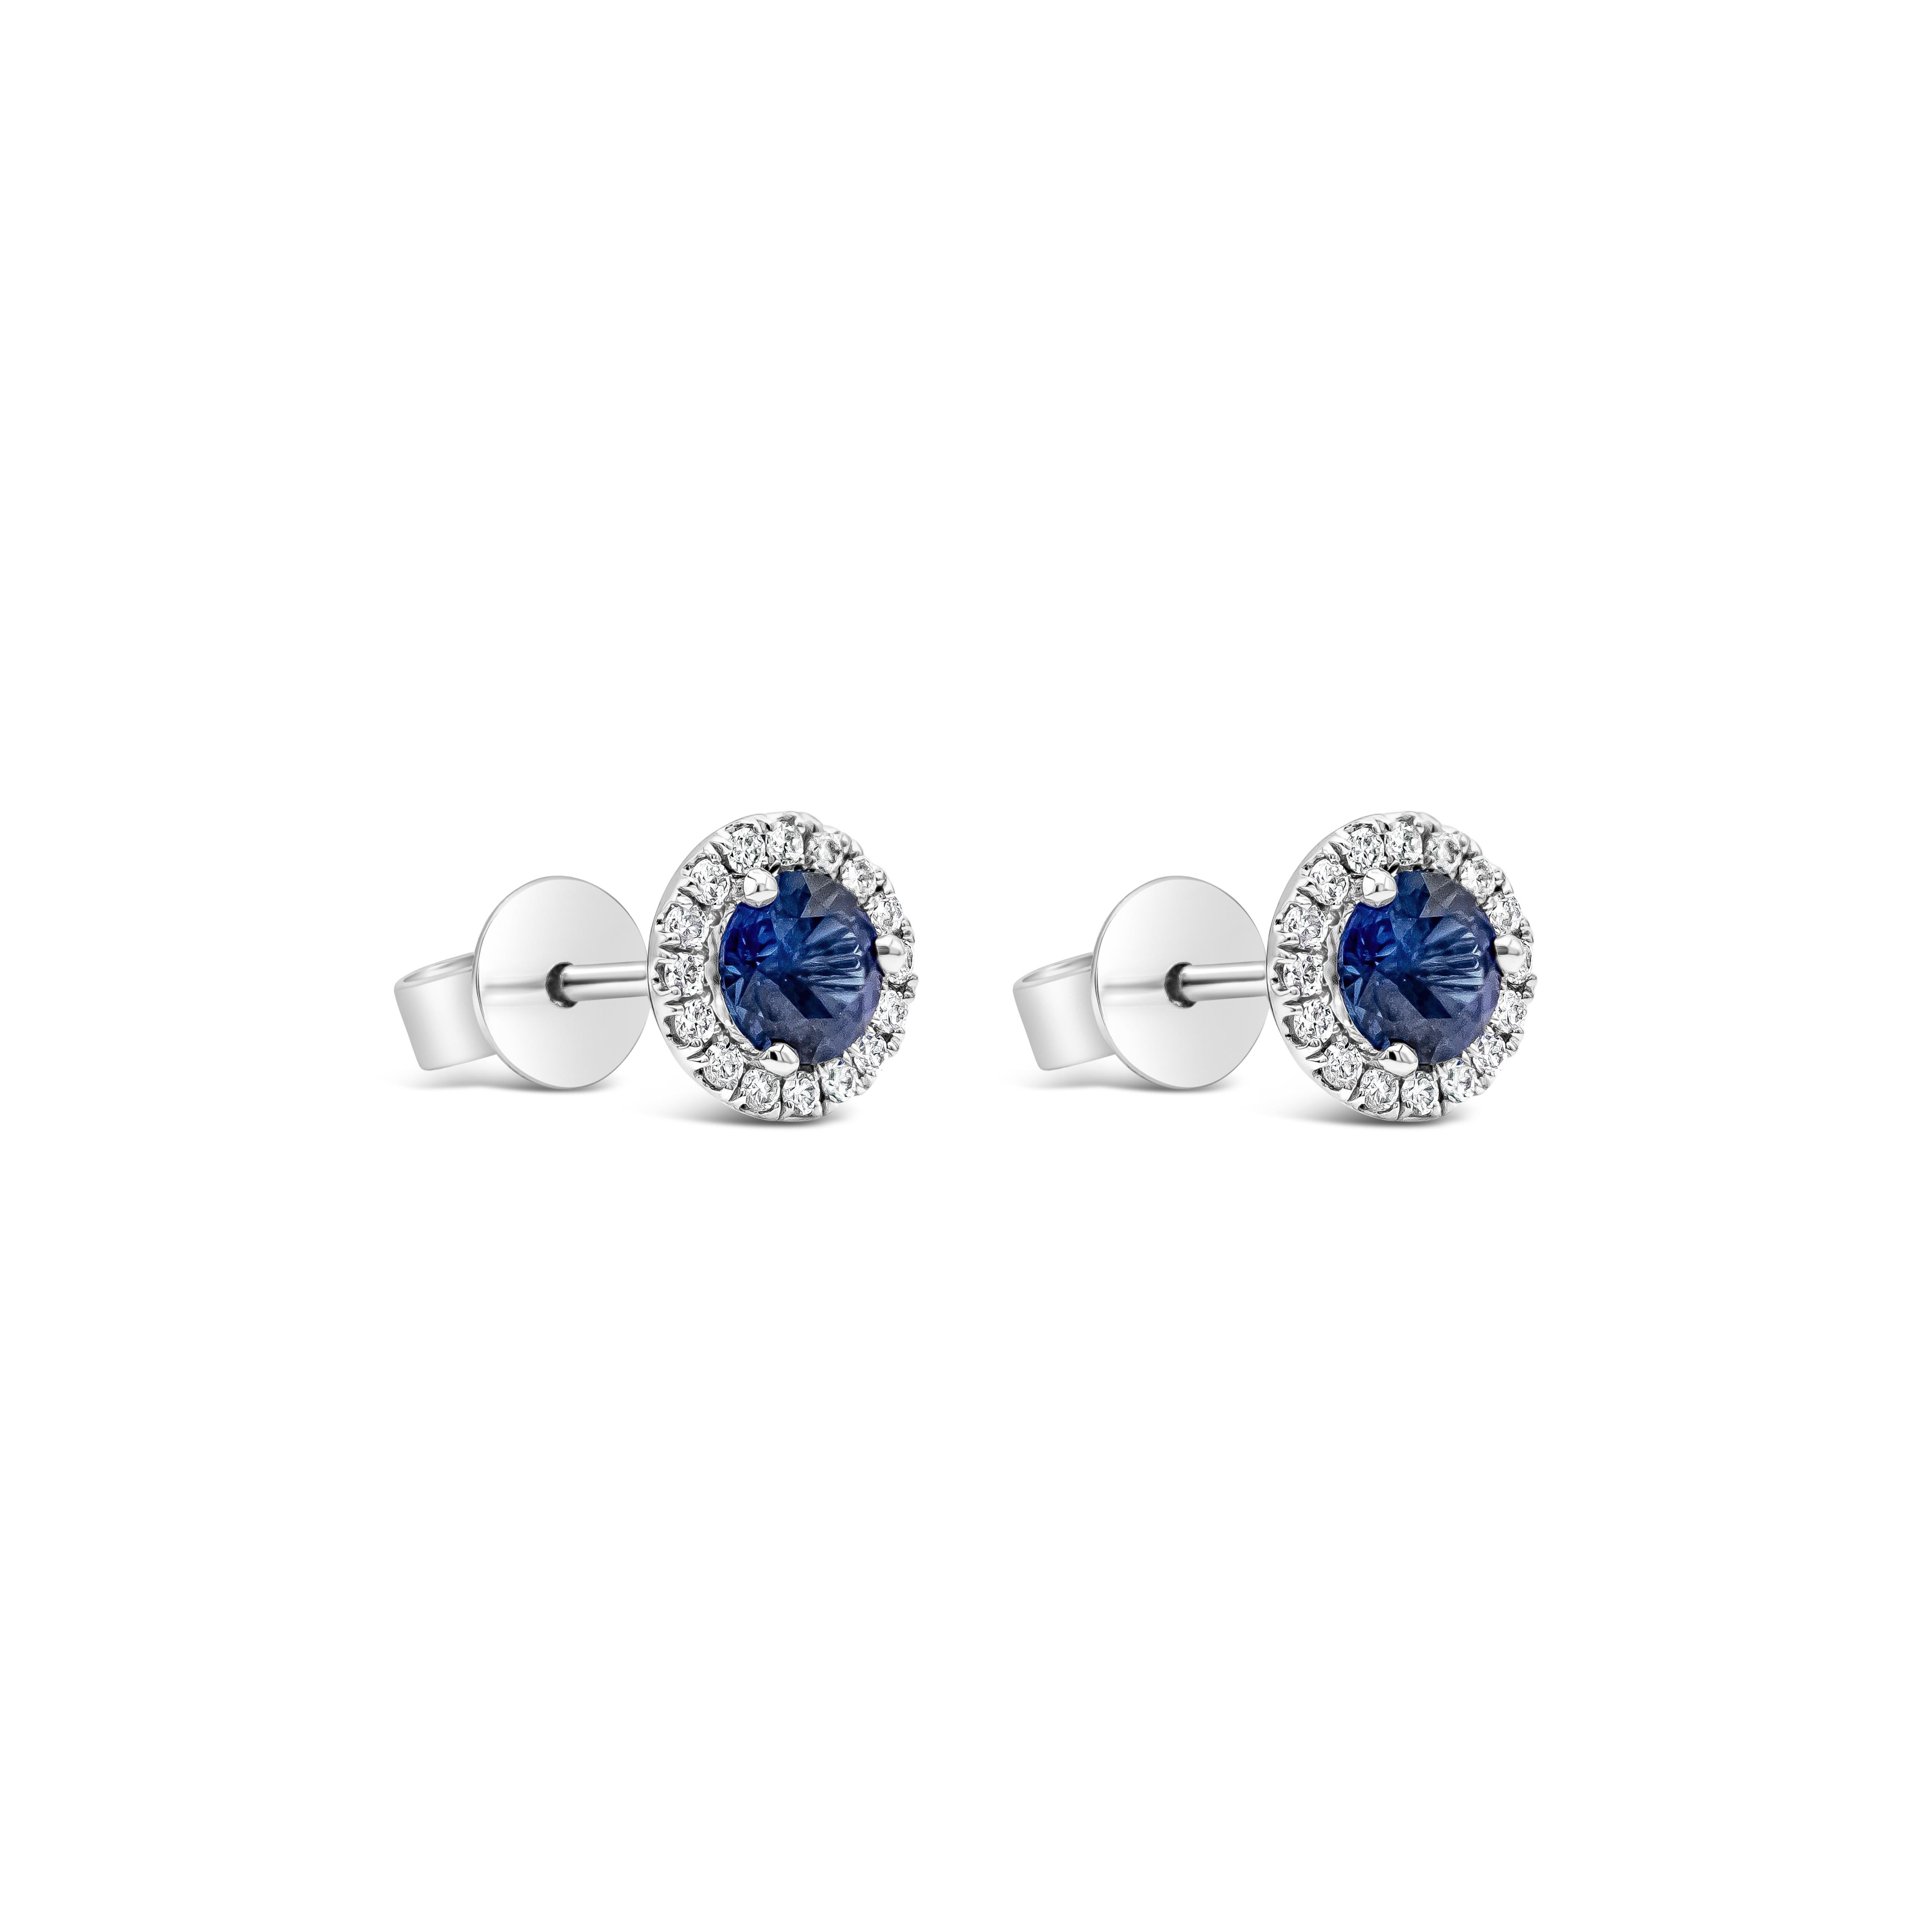 Contemporary GIA Certified 0.64 Carats Total Blue Sapphire and Diamond Halo Stud Earrings For Sale